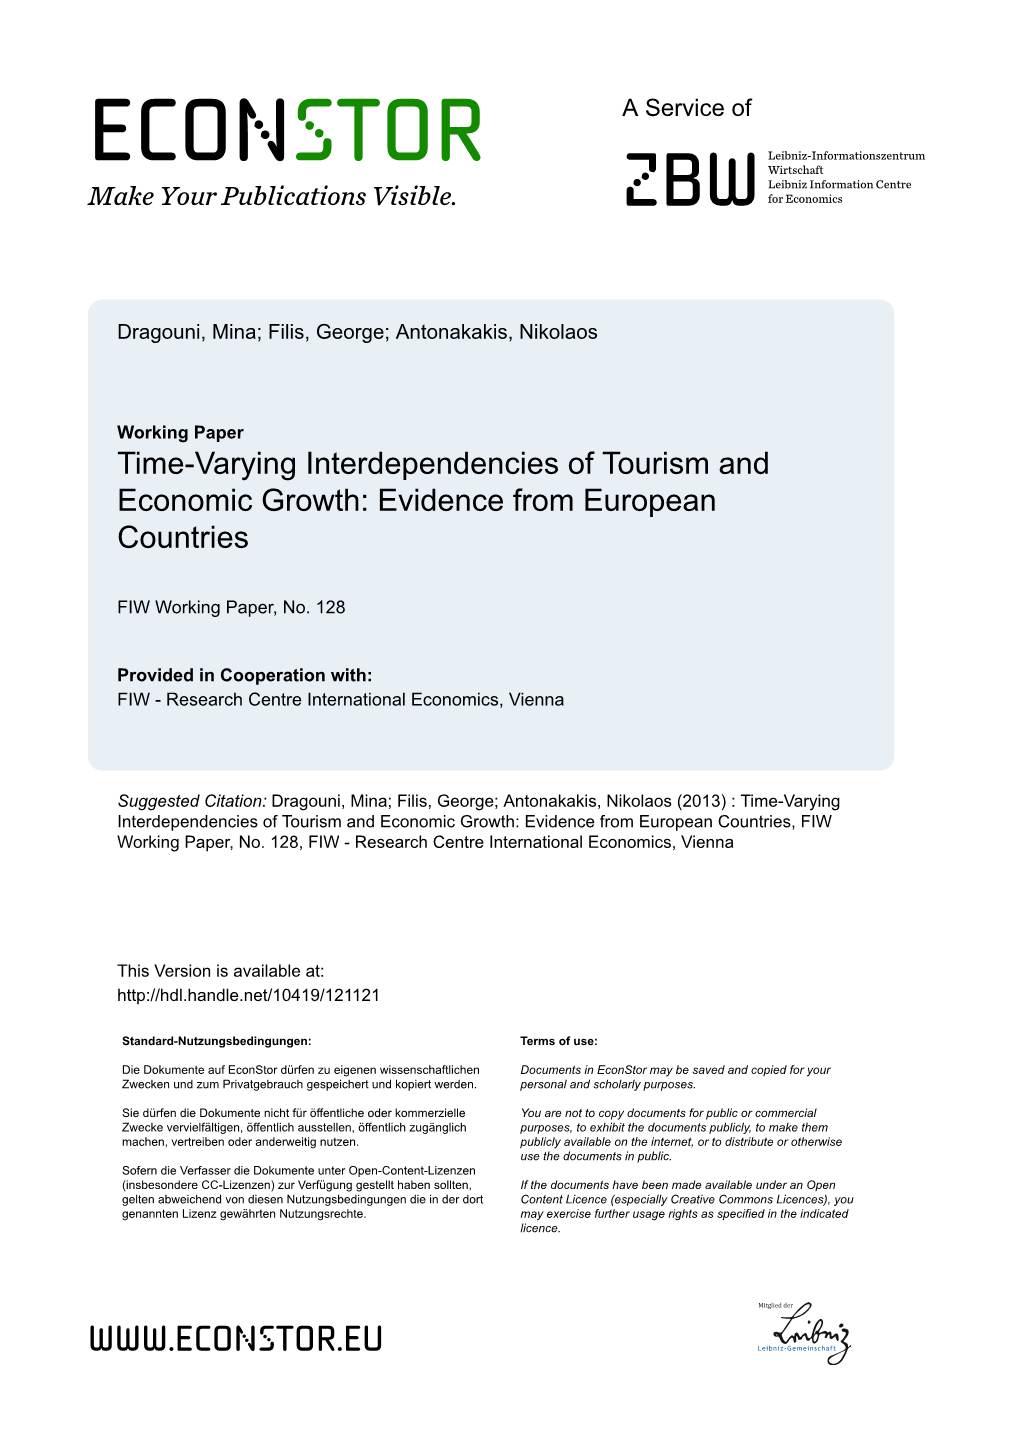 Time-Varying Interdependencies of Tourism and Economic Growth: Evidence from European Countries